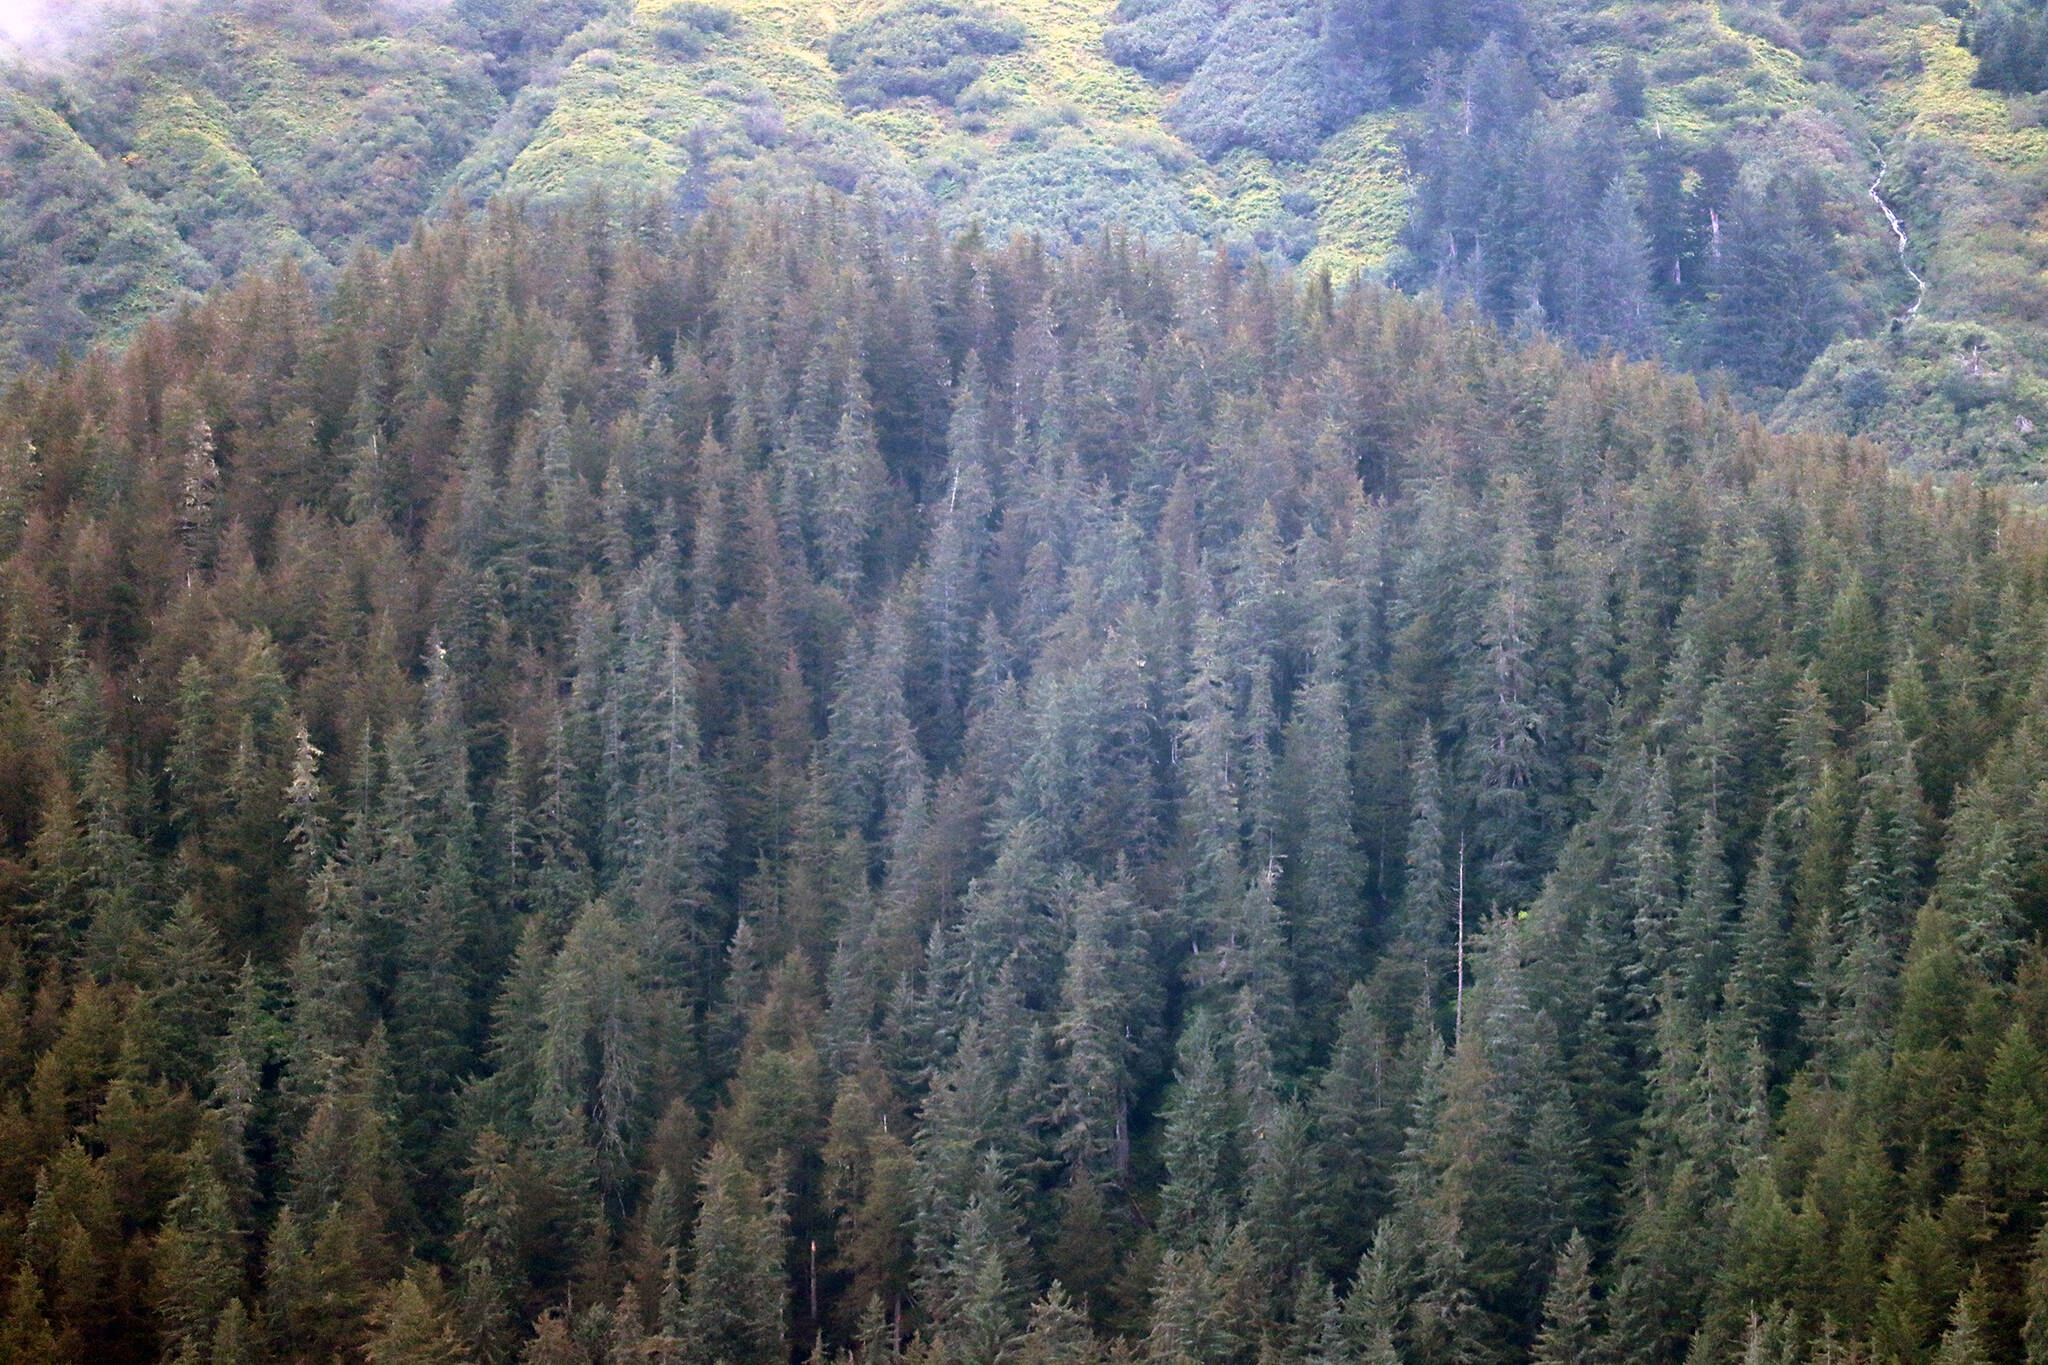 These trees with a reddish-brown coloration are evidence of a black-headed budworm outbreak in Southeast Alaska. While there is visible defoliation in some popular spots around Juneau, the impact is not limited to the capital city. Other impacted areas include Admiralty, Baranof, Kuiu, Kupreanof, Mitkof, Wrangell and Zarembo islands, according to the U.S. Forest Service. (Ben Hohenstatt / Juneau Empire)